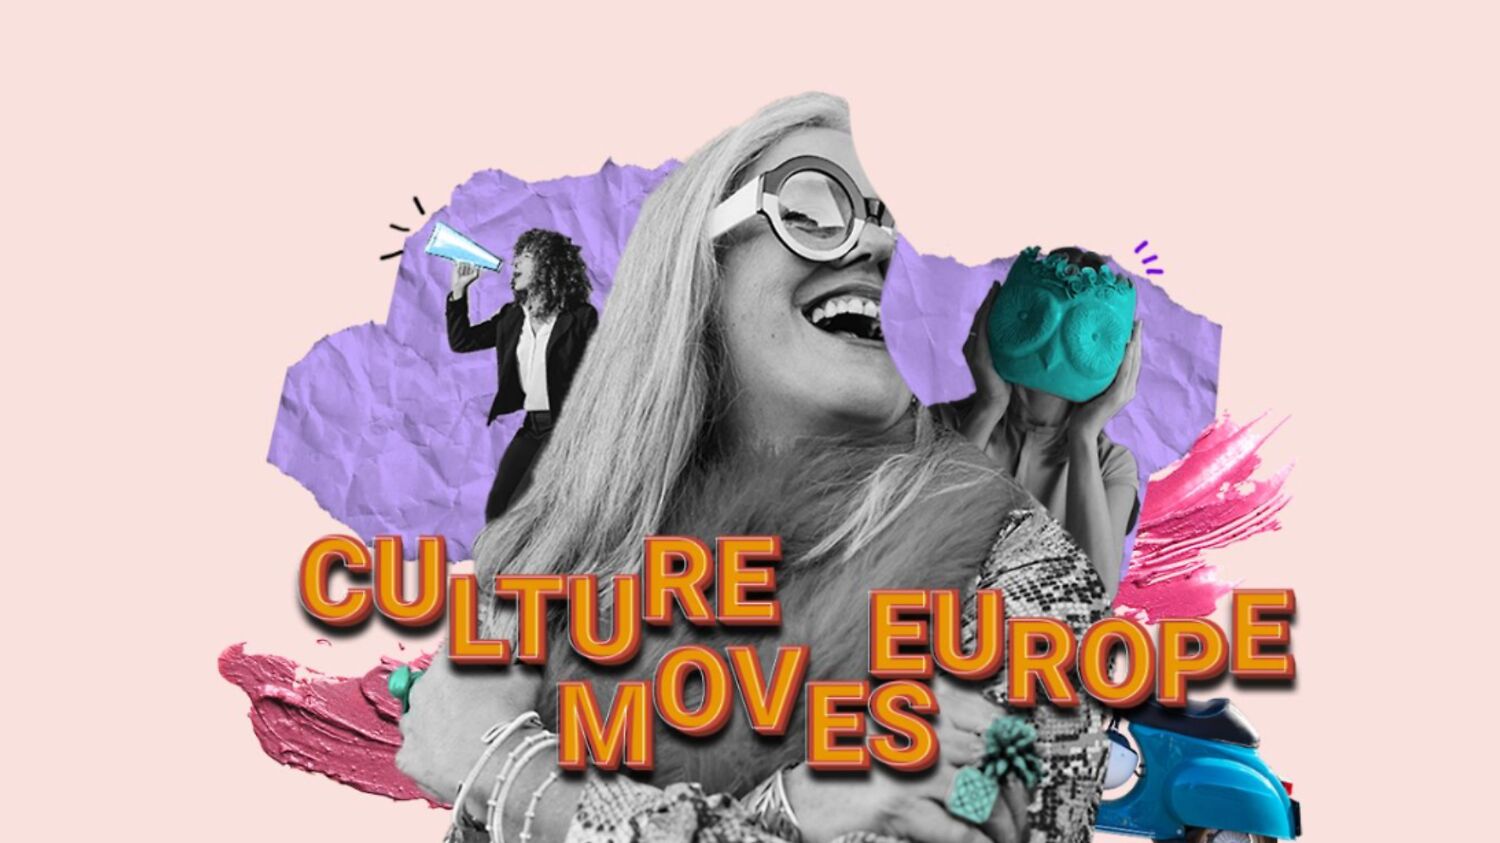 Culture Moves Europe call for individual mobility of artists and cultural professionals